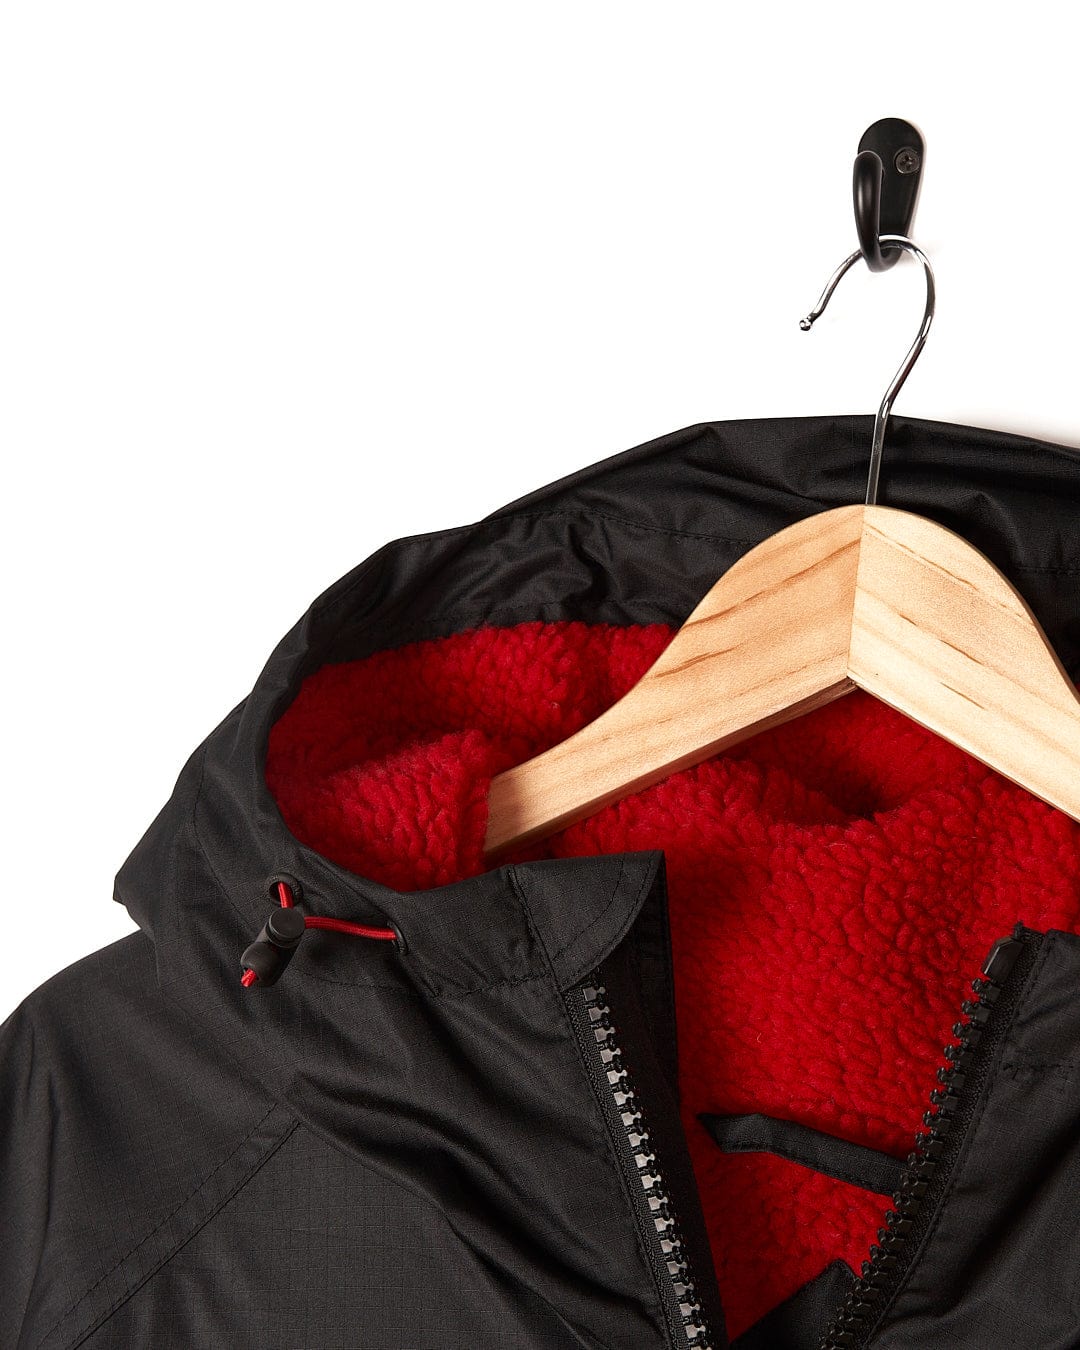 A Saltrock Four Seasons - Waterproof Changing Robe - Black/Red hanging on a wooden hanger.